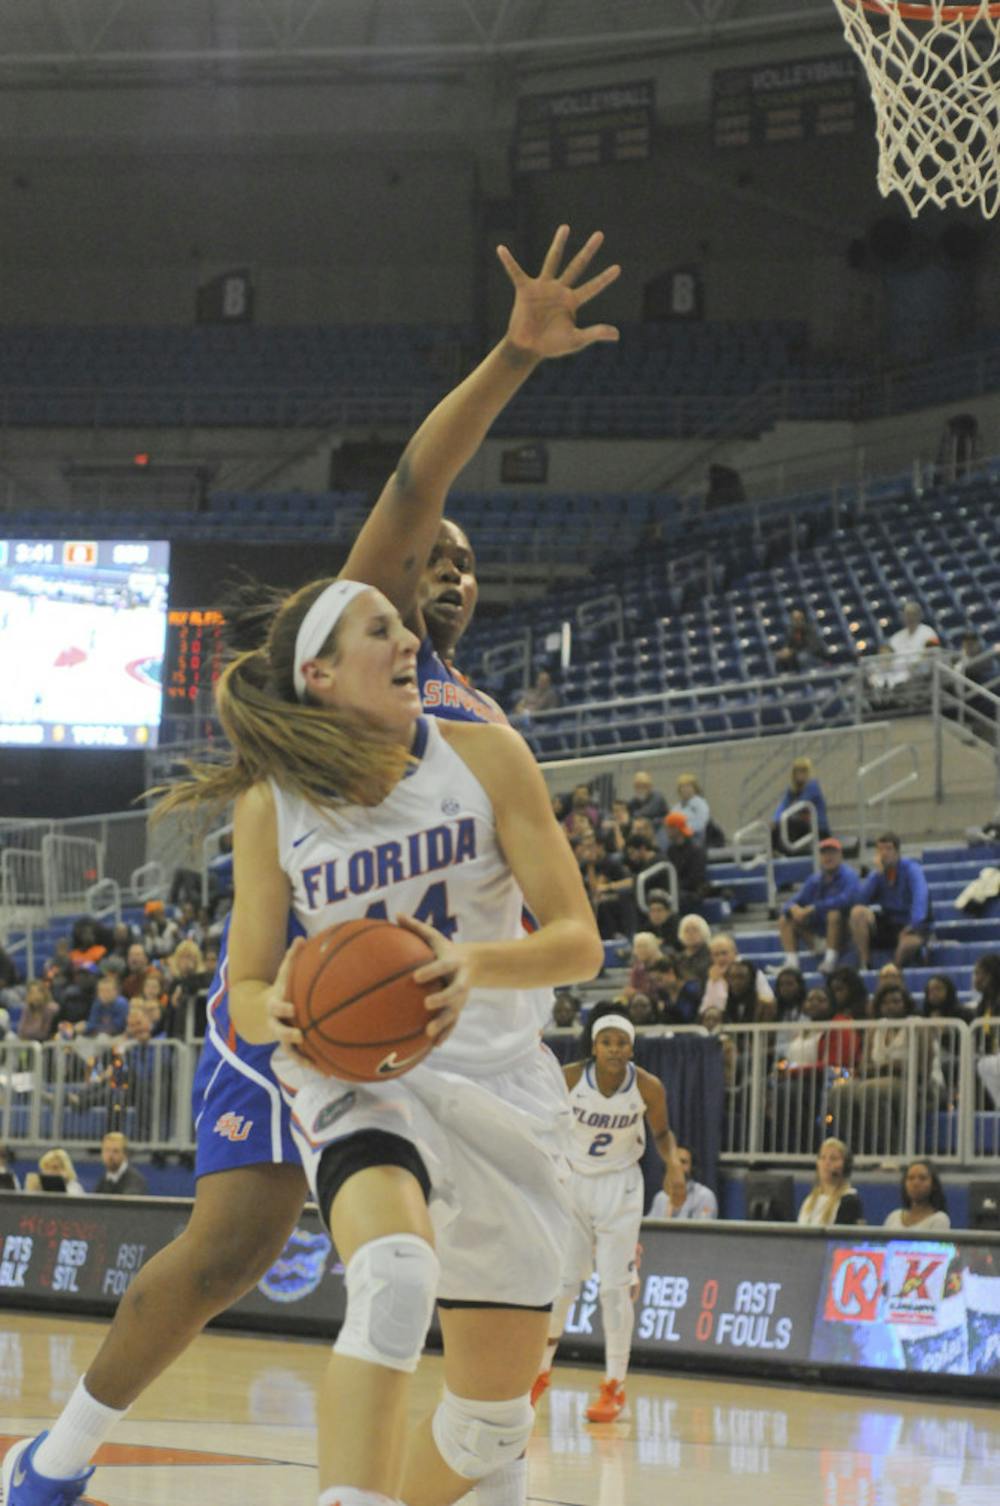 <p>Haley Lorenzen battles for position in the paint during Florida's 99-34 win against Savannah State on Nov. 24, 2015, in the O'Connell Center.</p>